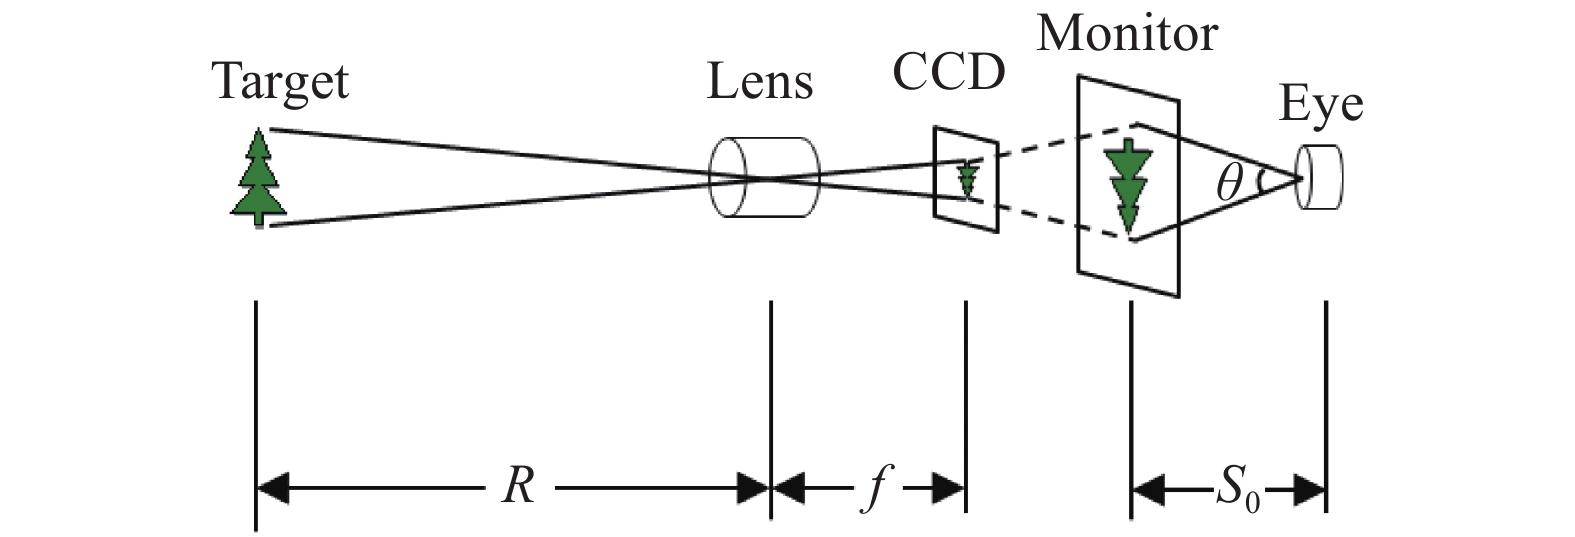 Diagram of reconnoiter by eyes and CCD